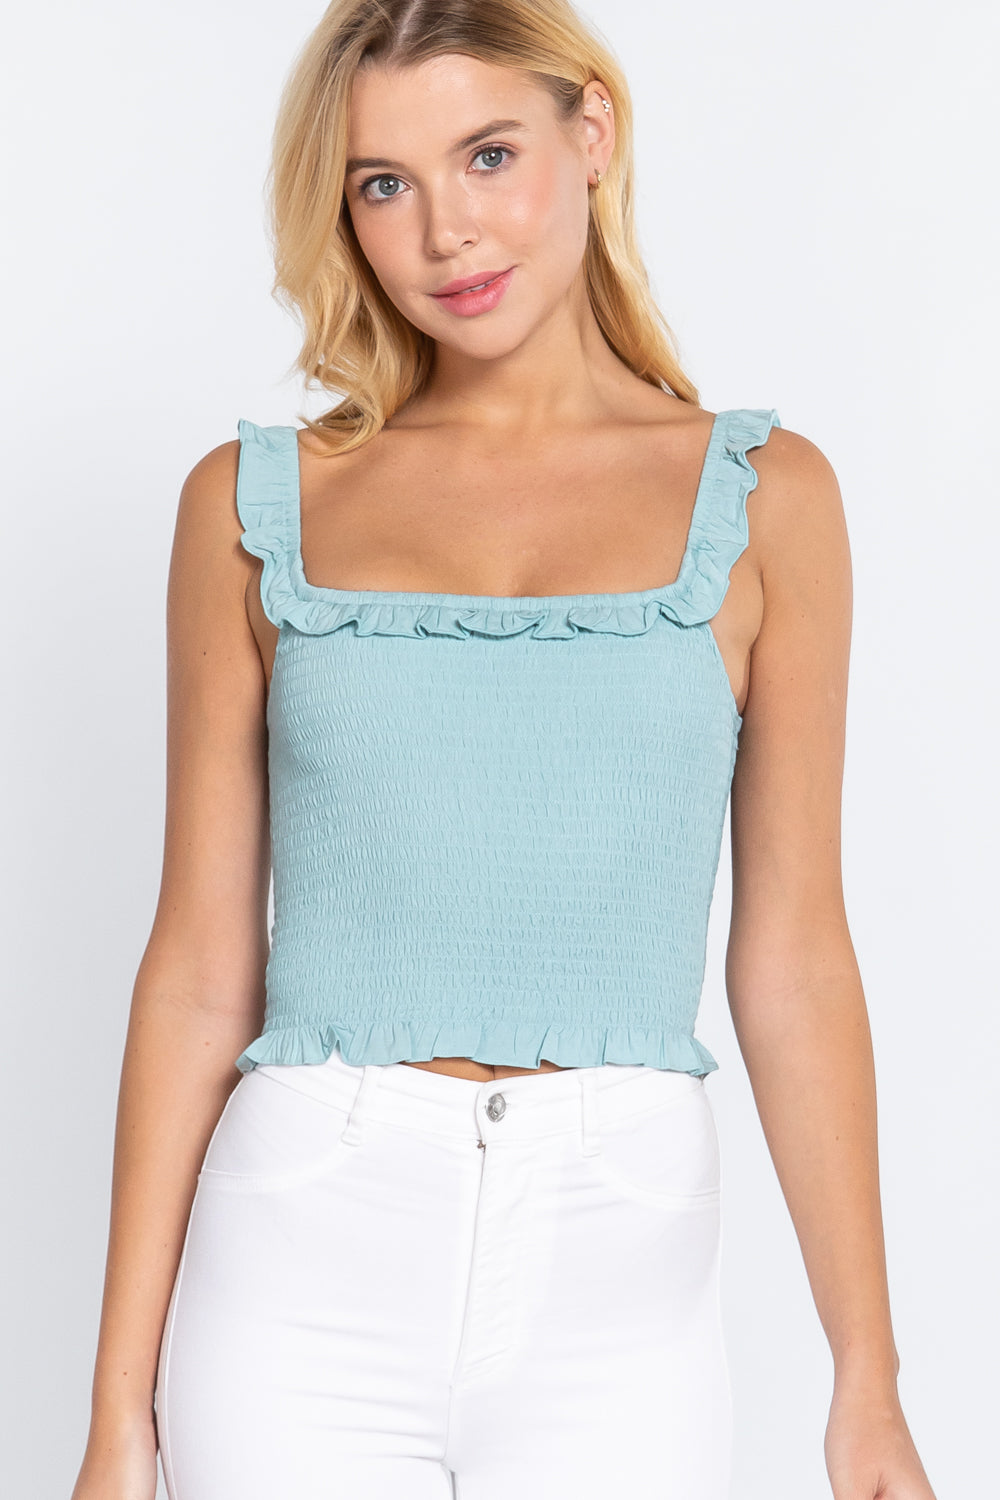 MINT Smocking Ruffle Cami Woven Top - Ships from The US - women's shirts at TFC&H Co.